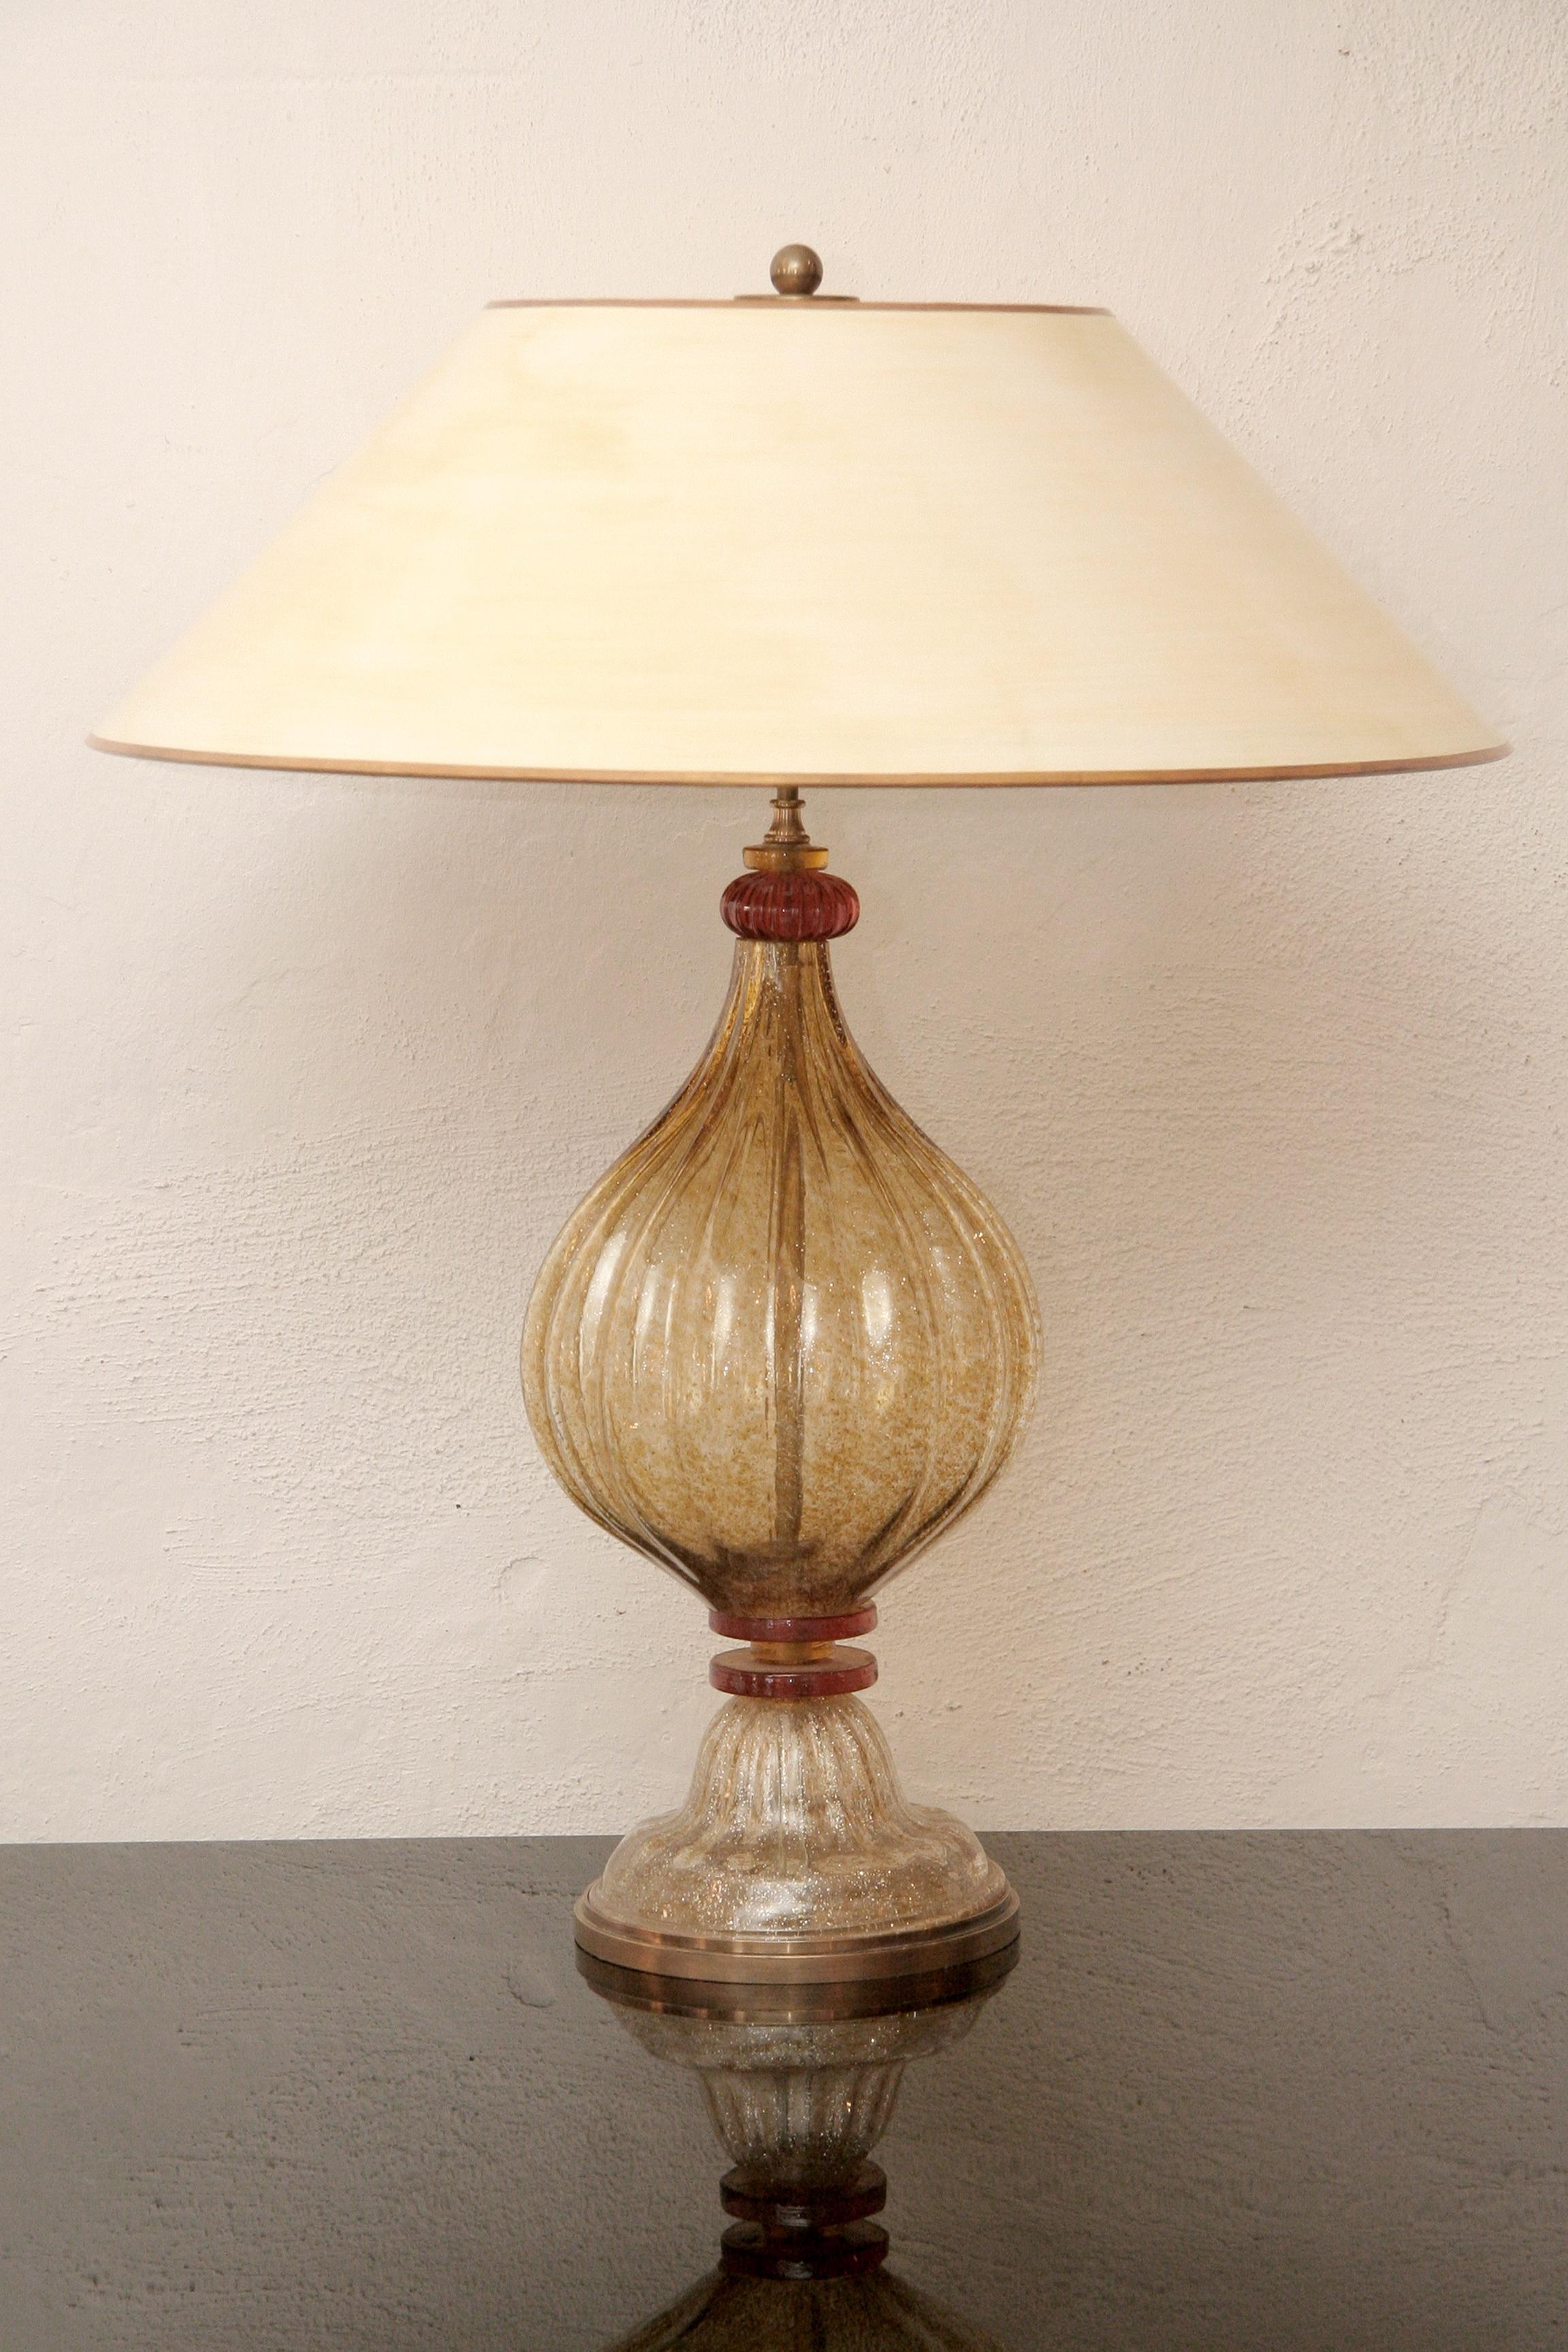 Italian Murano glass table lamp from the 1970s
Gold and orange glass - beige colored lamp shade
The middle shaft and foot is ribbed.
The foot stands in a patinated brass base, the lamp construction is also out of brass.
The large shade with a